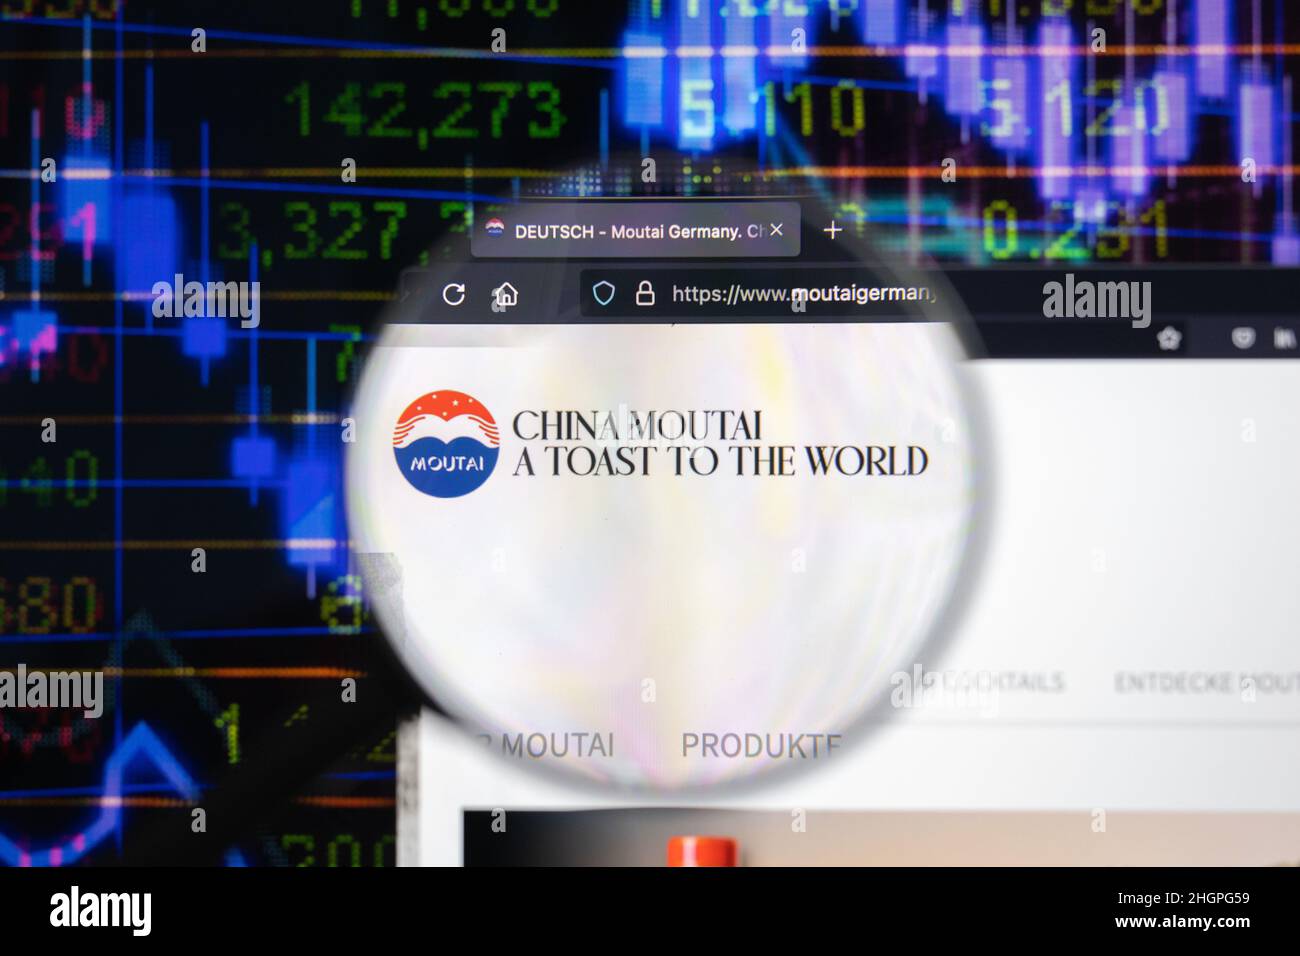 Moutai company logo on a website with blurry stock market developments in the background, seen on a computer screen through a magnifying glass. Stock Photo